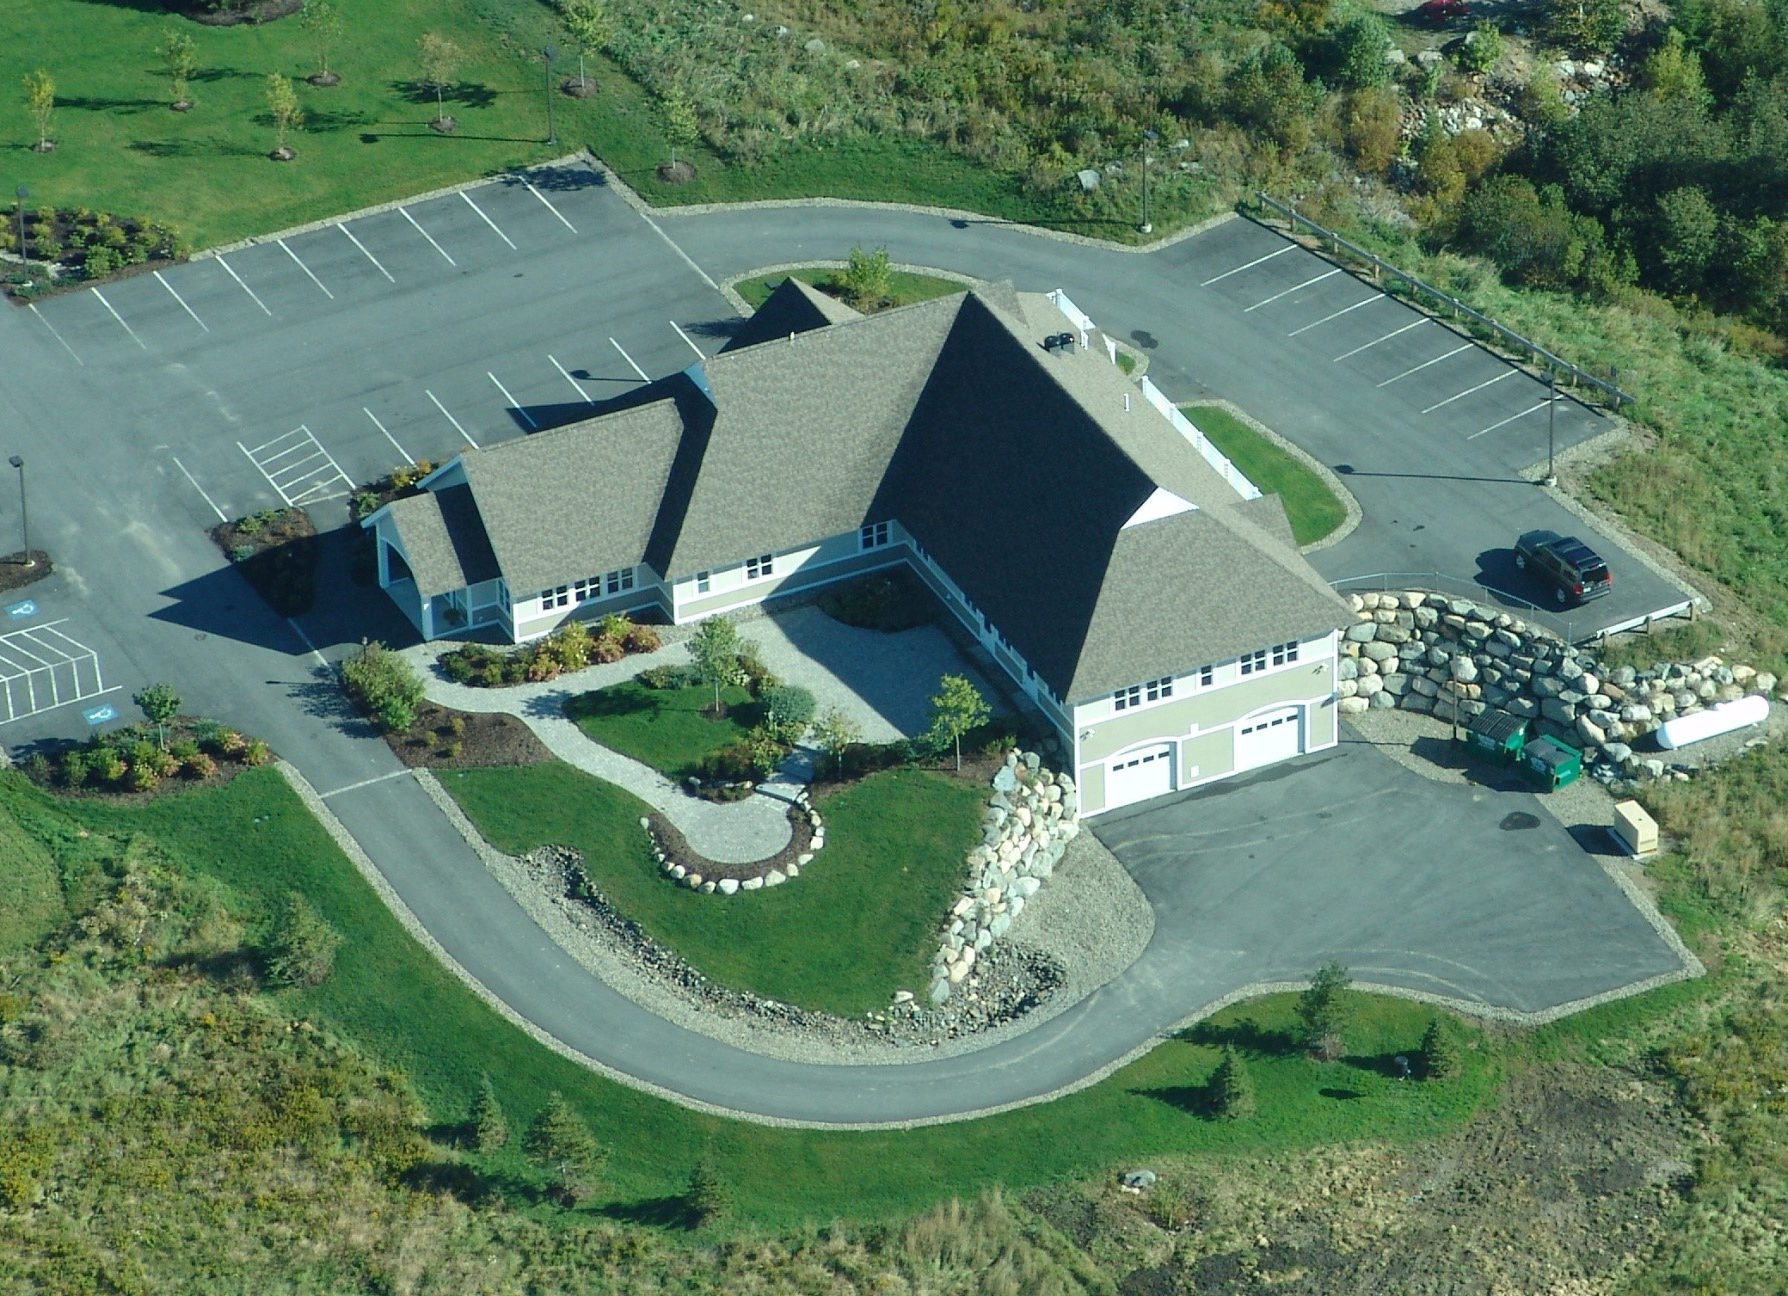 Aerial view of Machias Dental office with parking lot and greenery